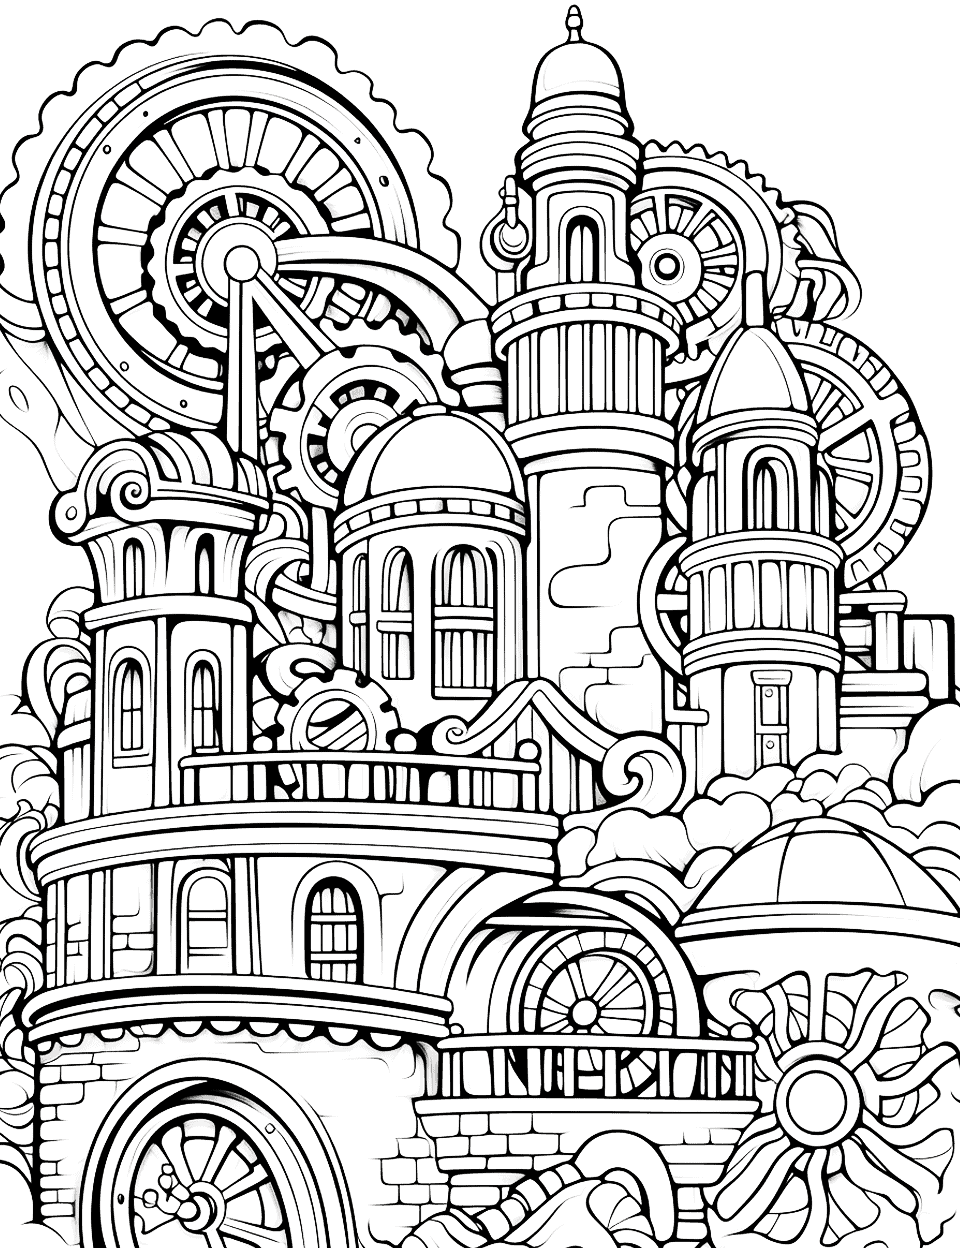 Steampunk Cityscape Adult Coloring Page - An intricate, detailed cityscape in the steampunk style, complete with gears, pipes, and steam-powered machinery.